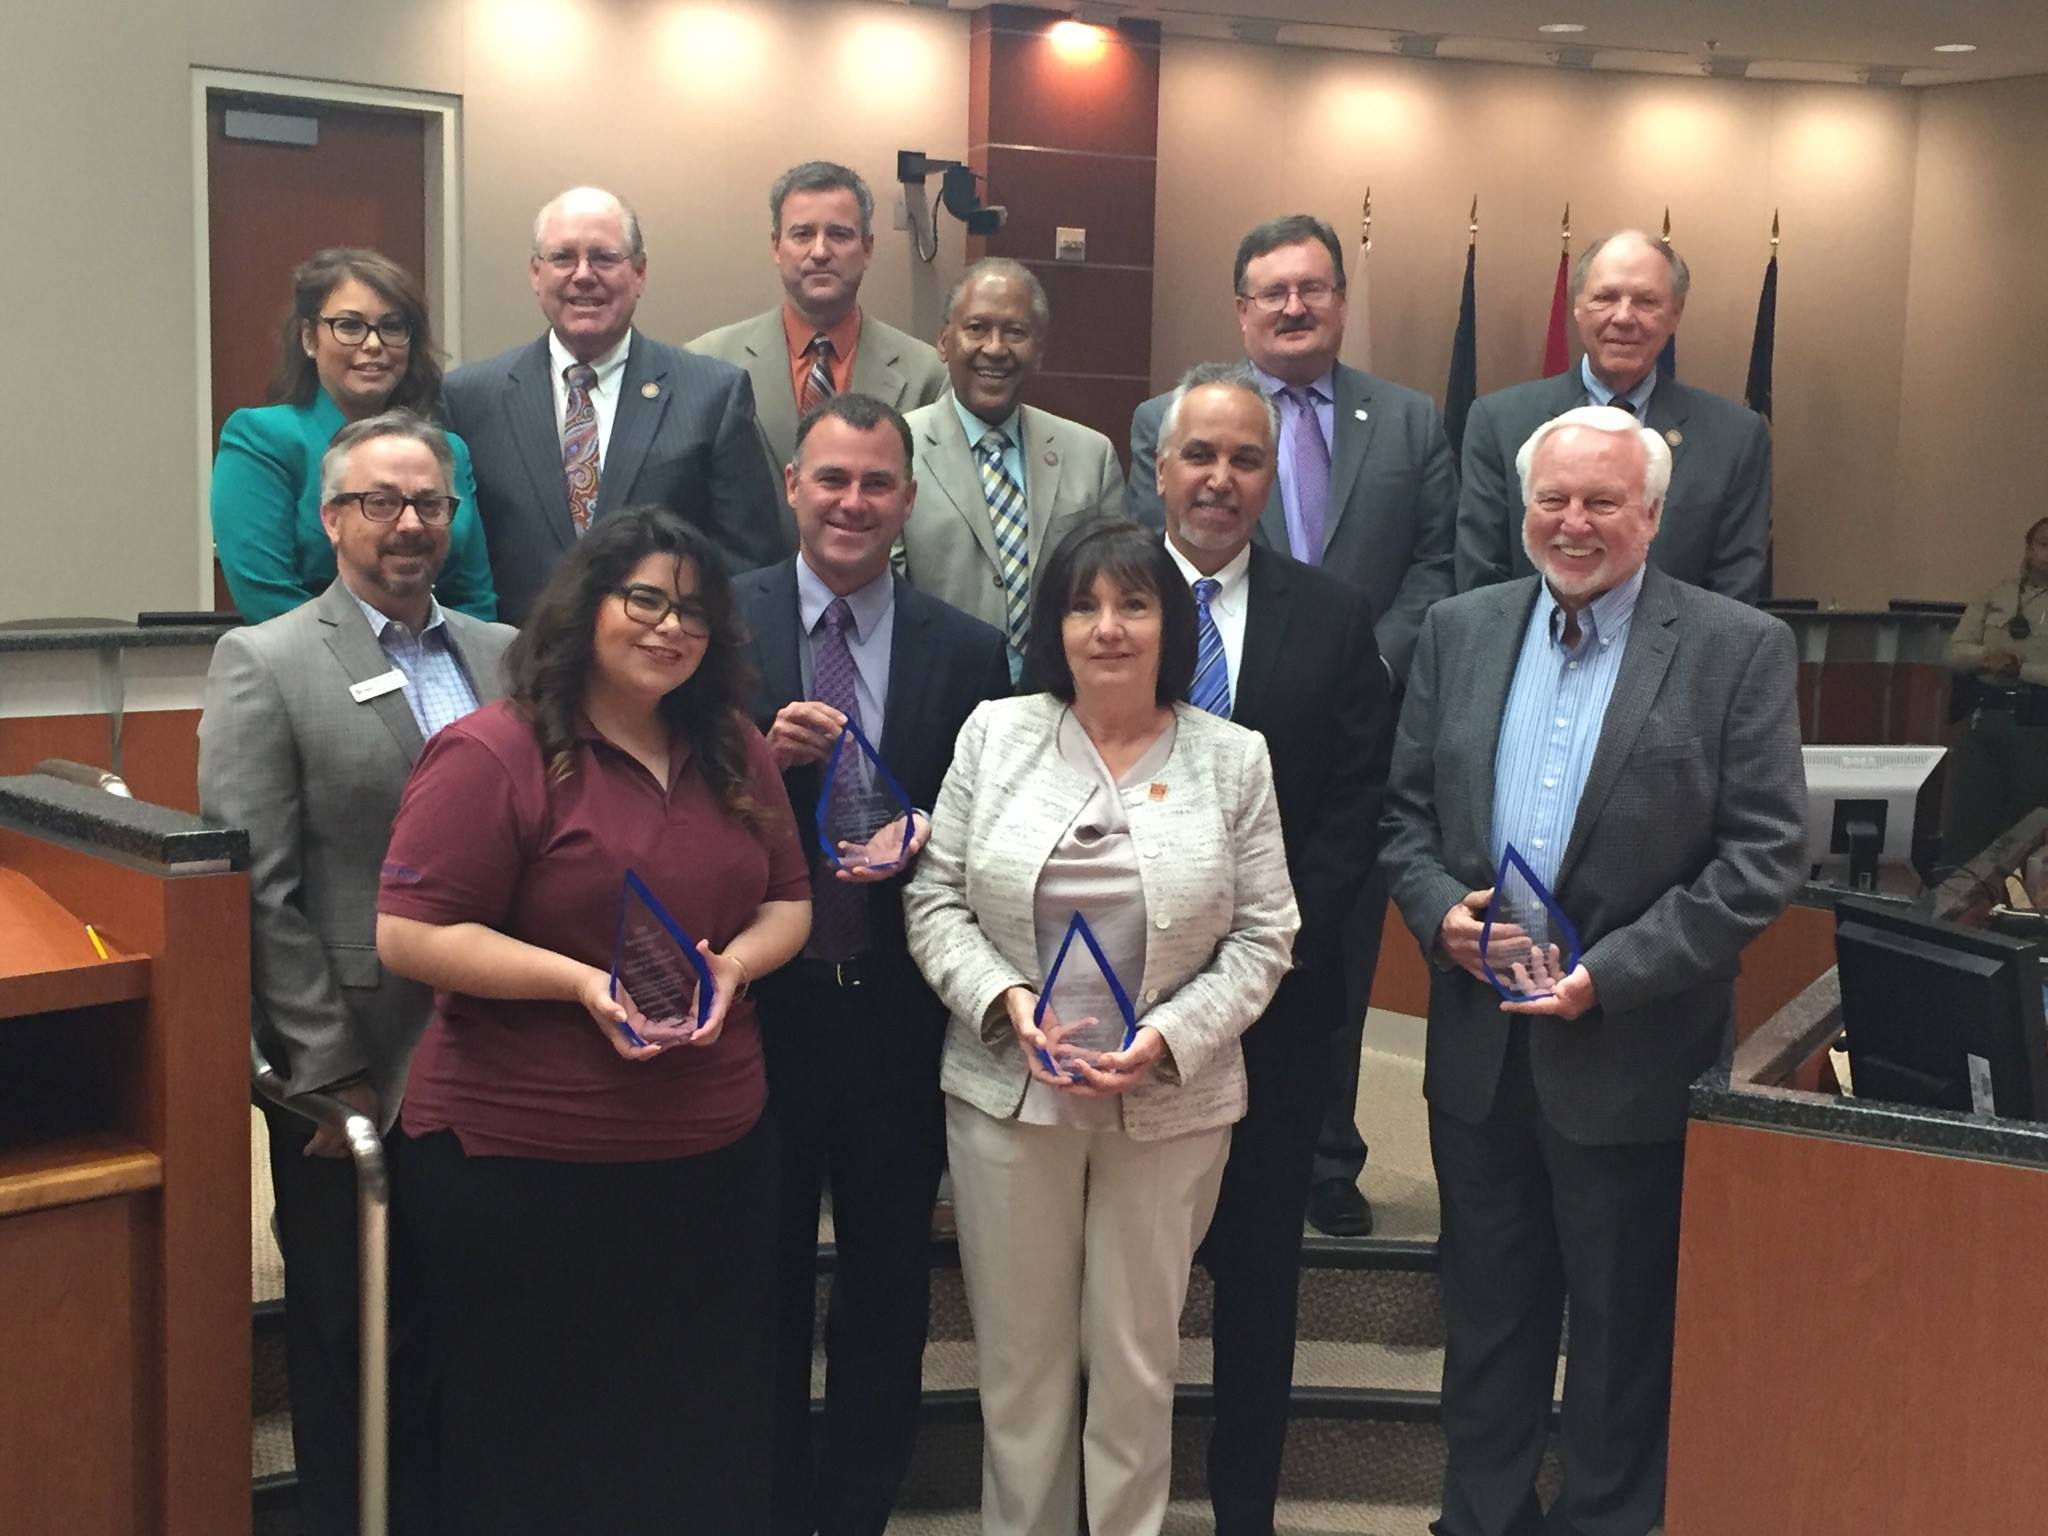 Following Earth Day, the Department of Waste Resources gave out Sustainability Awards to one organization from each district.